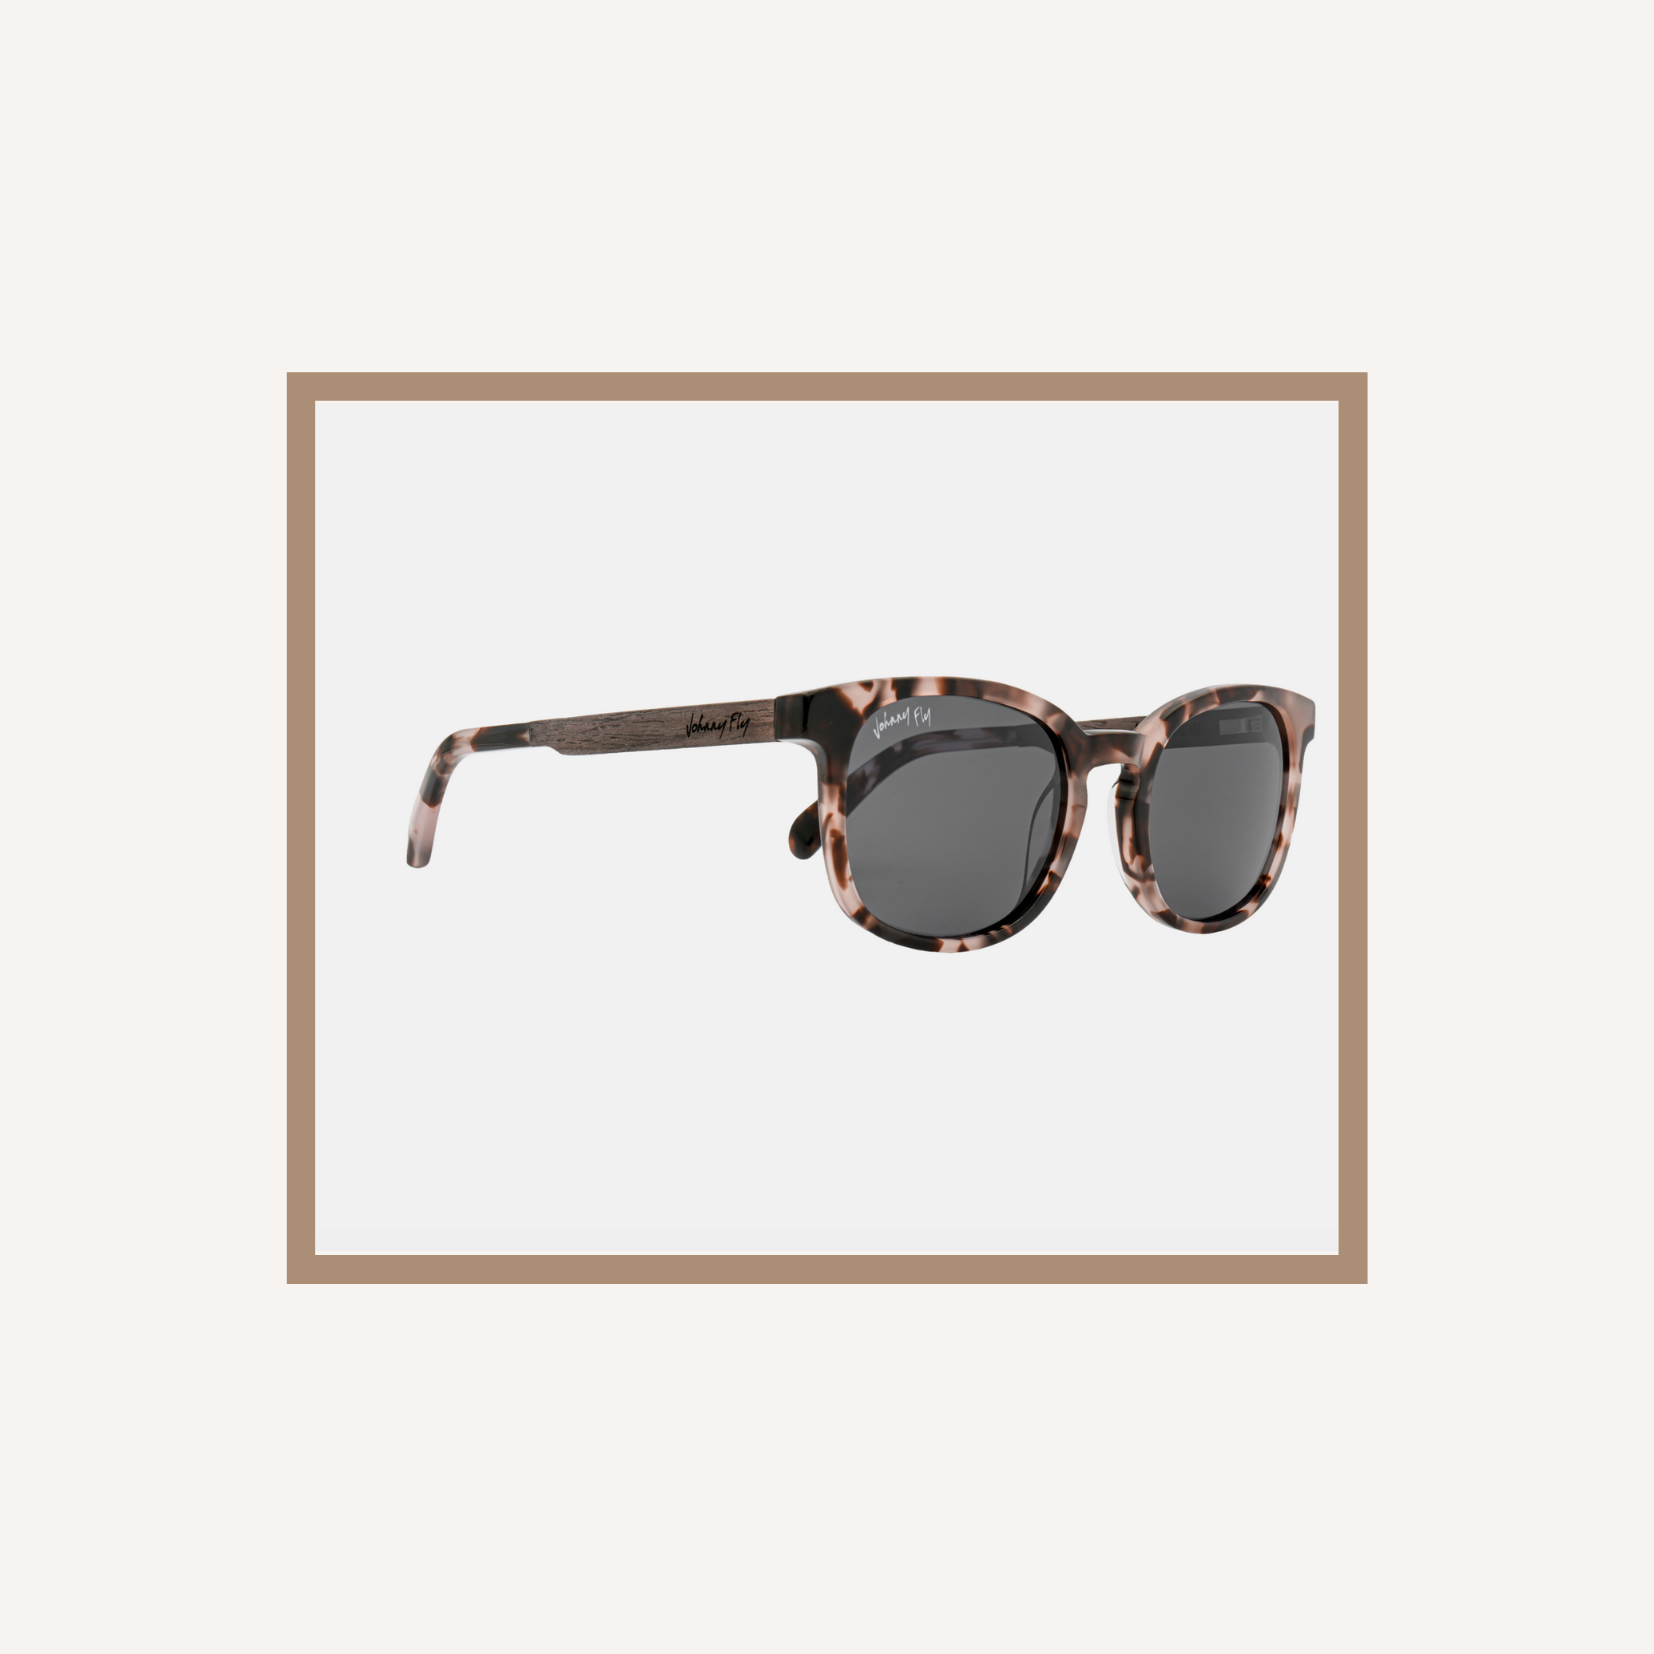 Johnny Fly Sunglasses, Wooden Sunglasses | Louella Reese